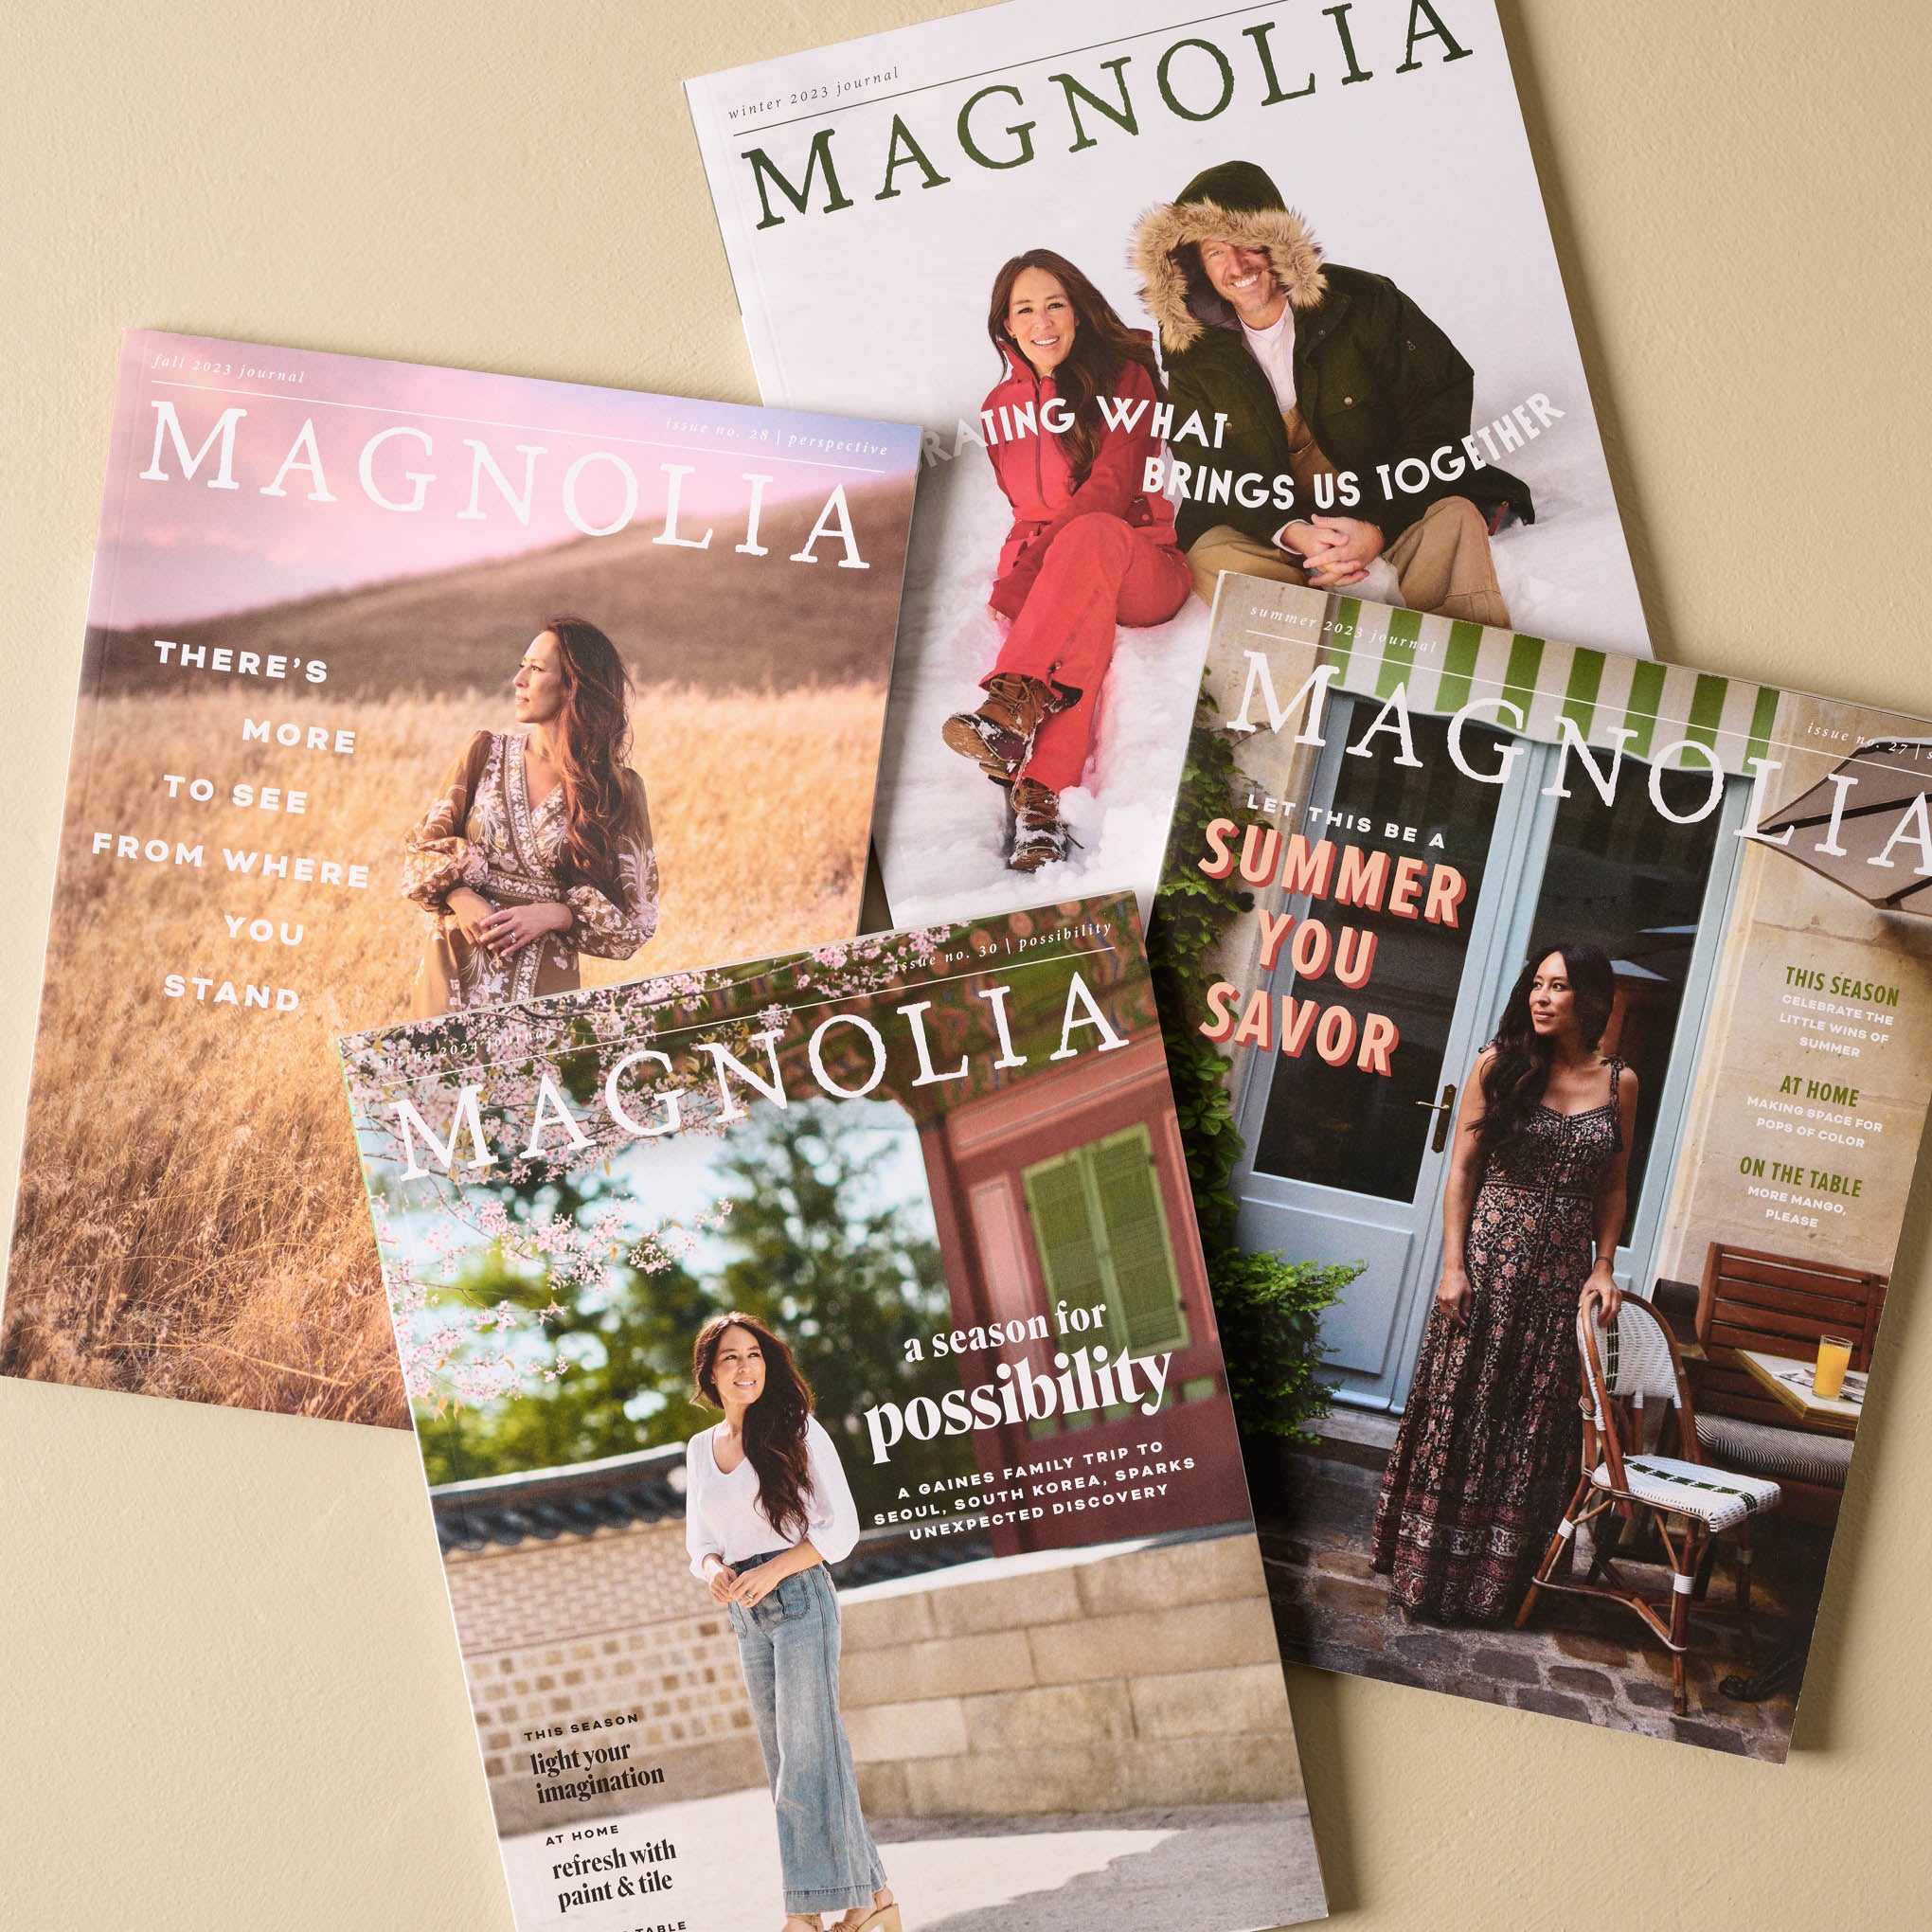 magnolia journal subscription incudes the spring, summer, fall and winter issues Items range from $20.00 to $50.00